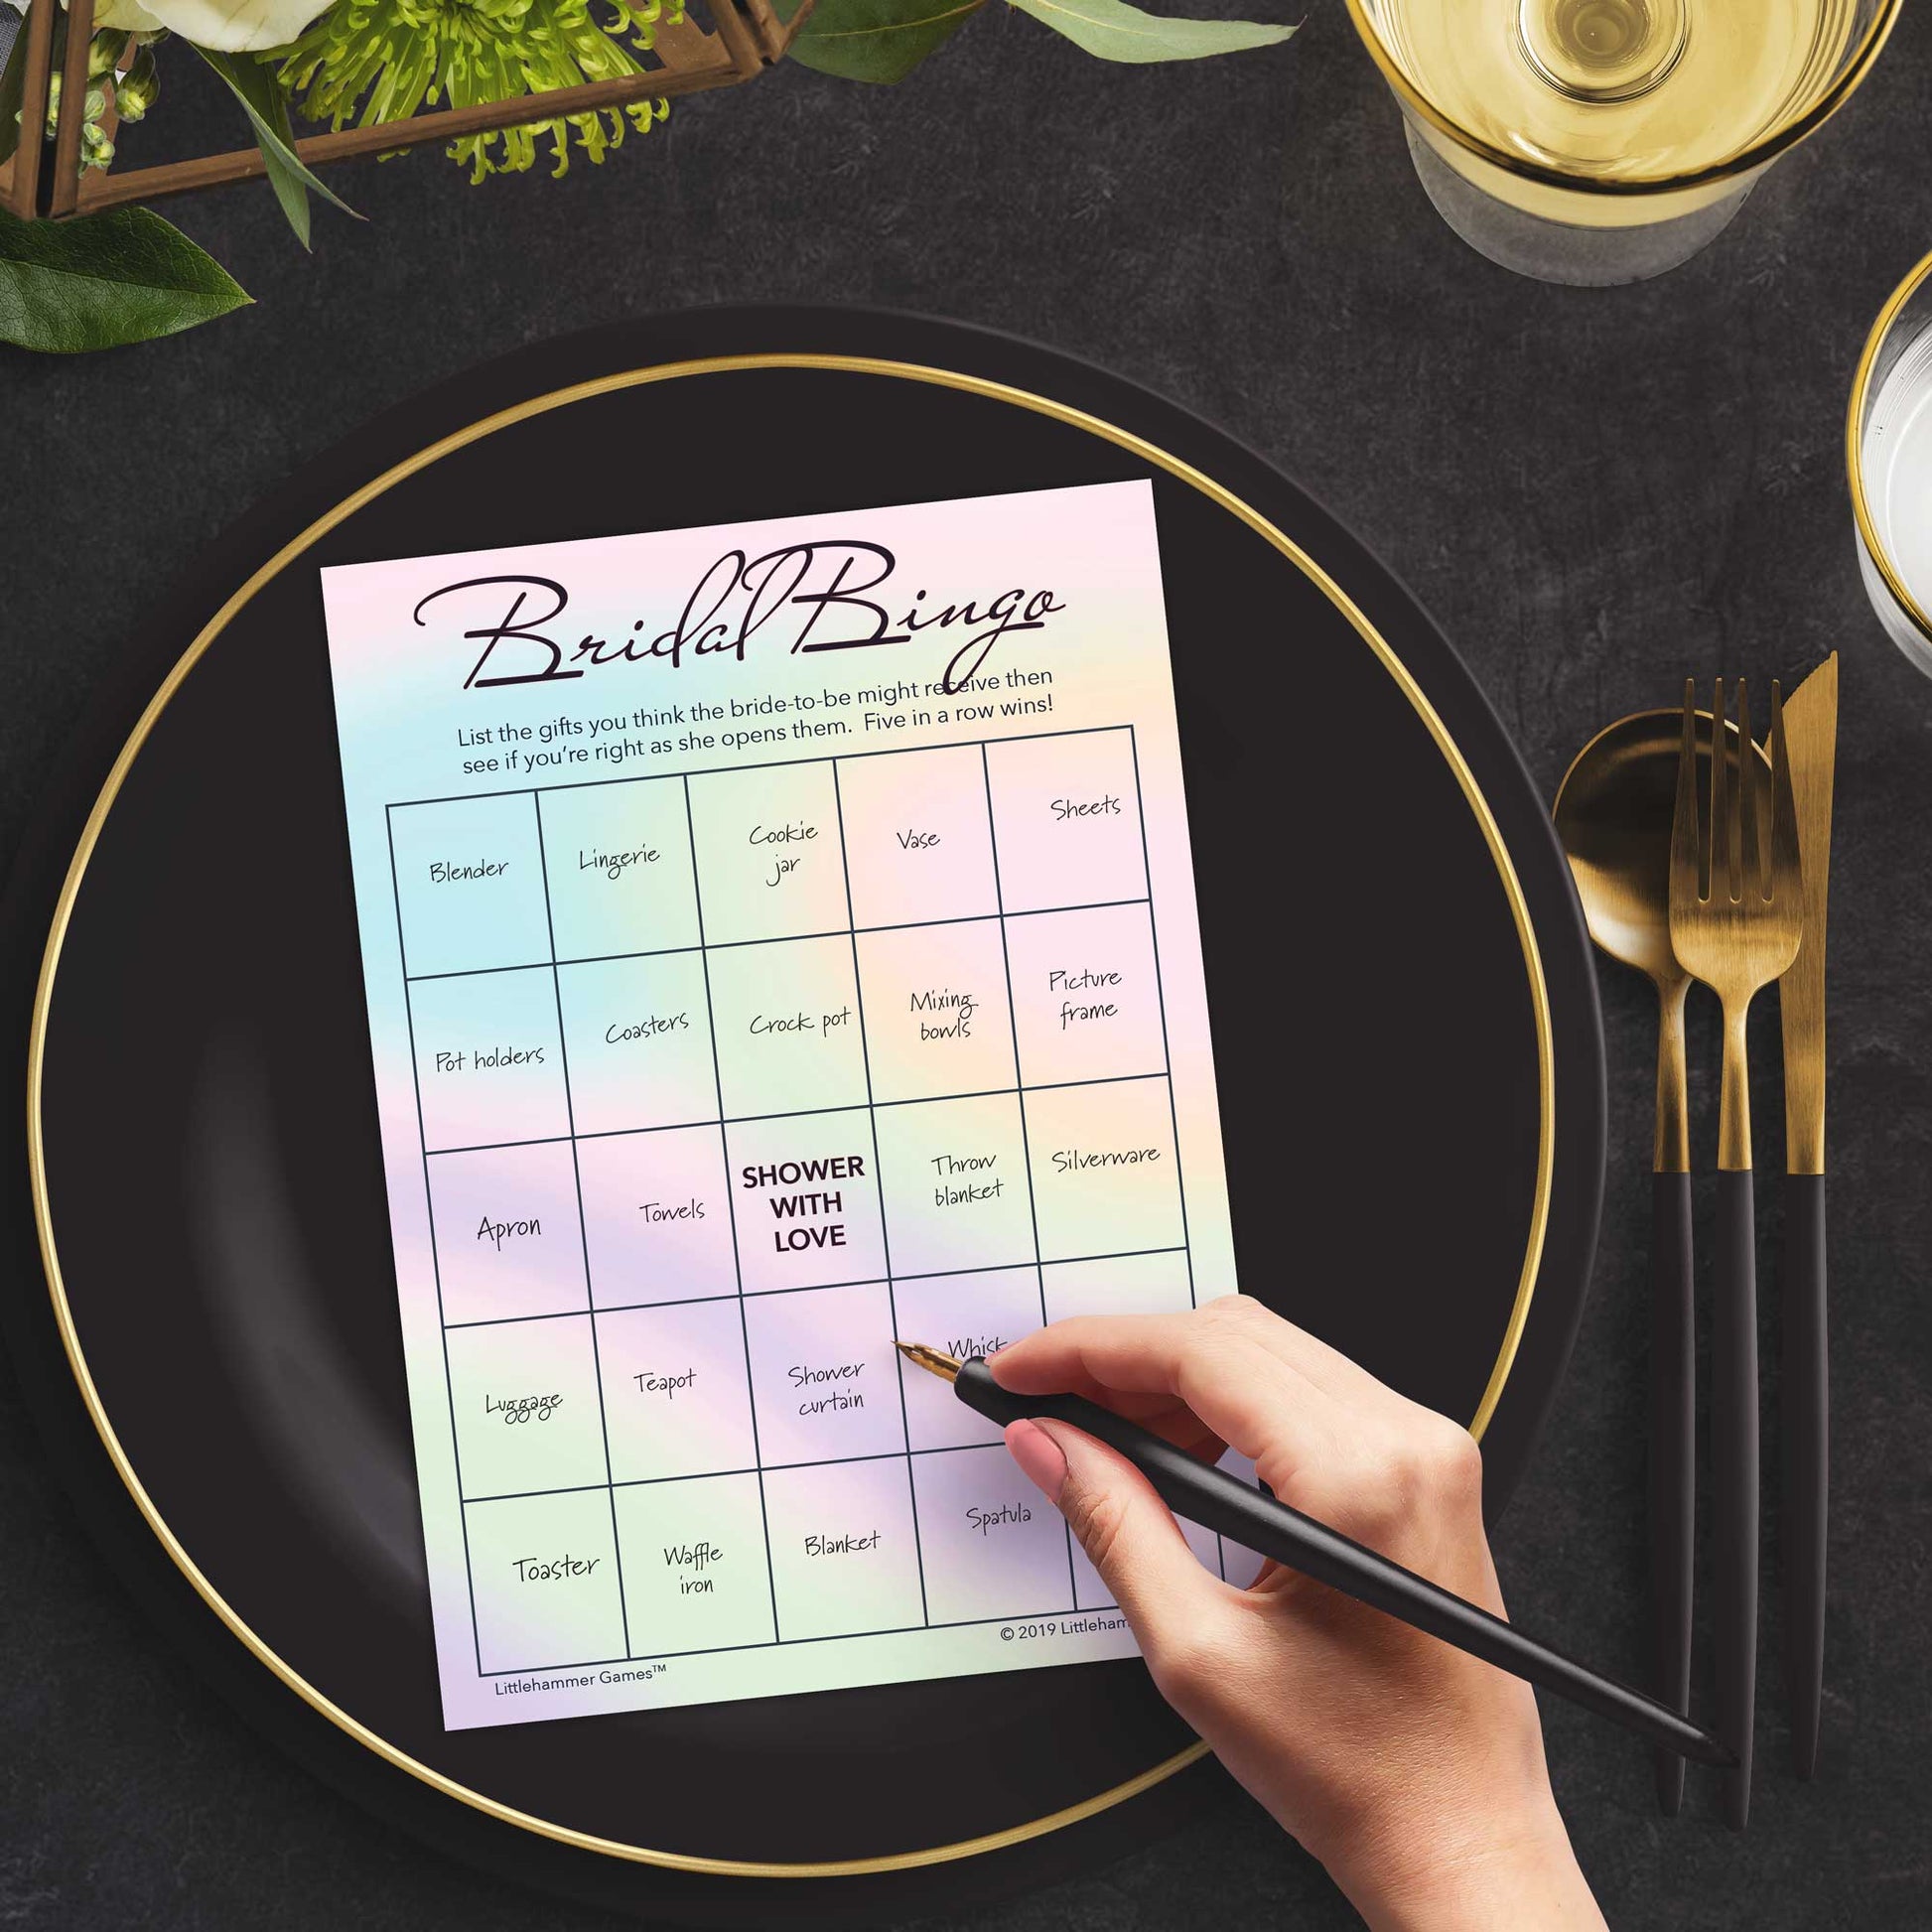 Woman with a pen sitting at a dark place setting with a black and gold plate filling out a hologram-themed Bridal Gift Bingo card